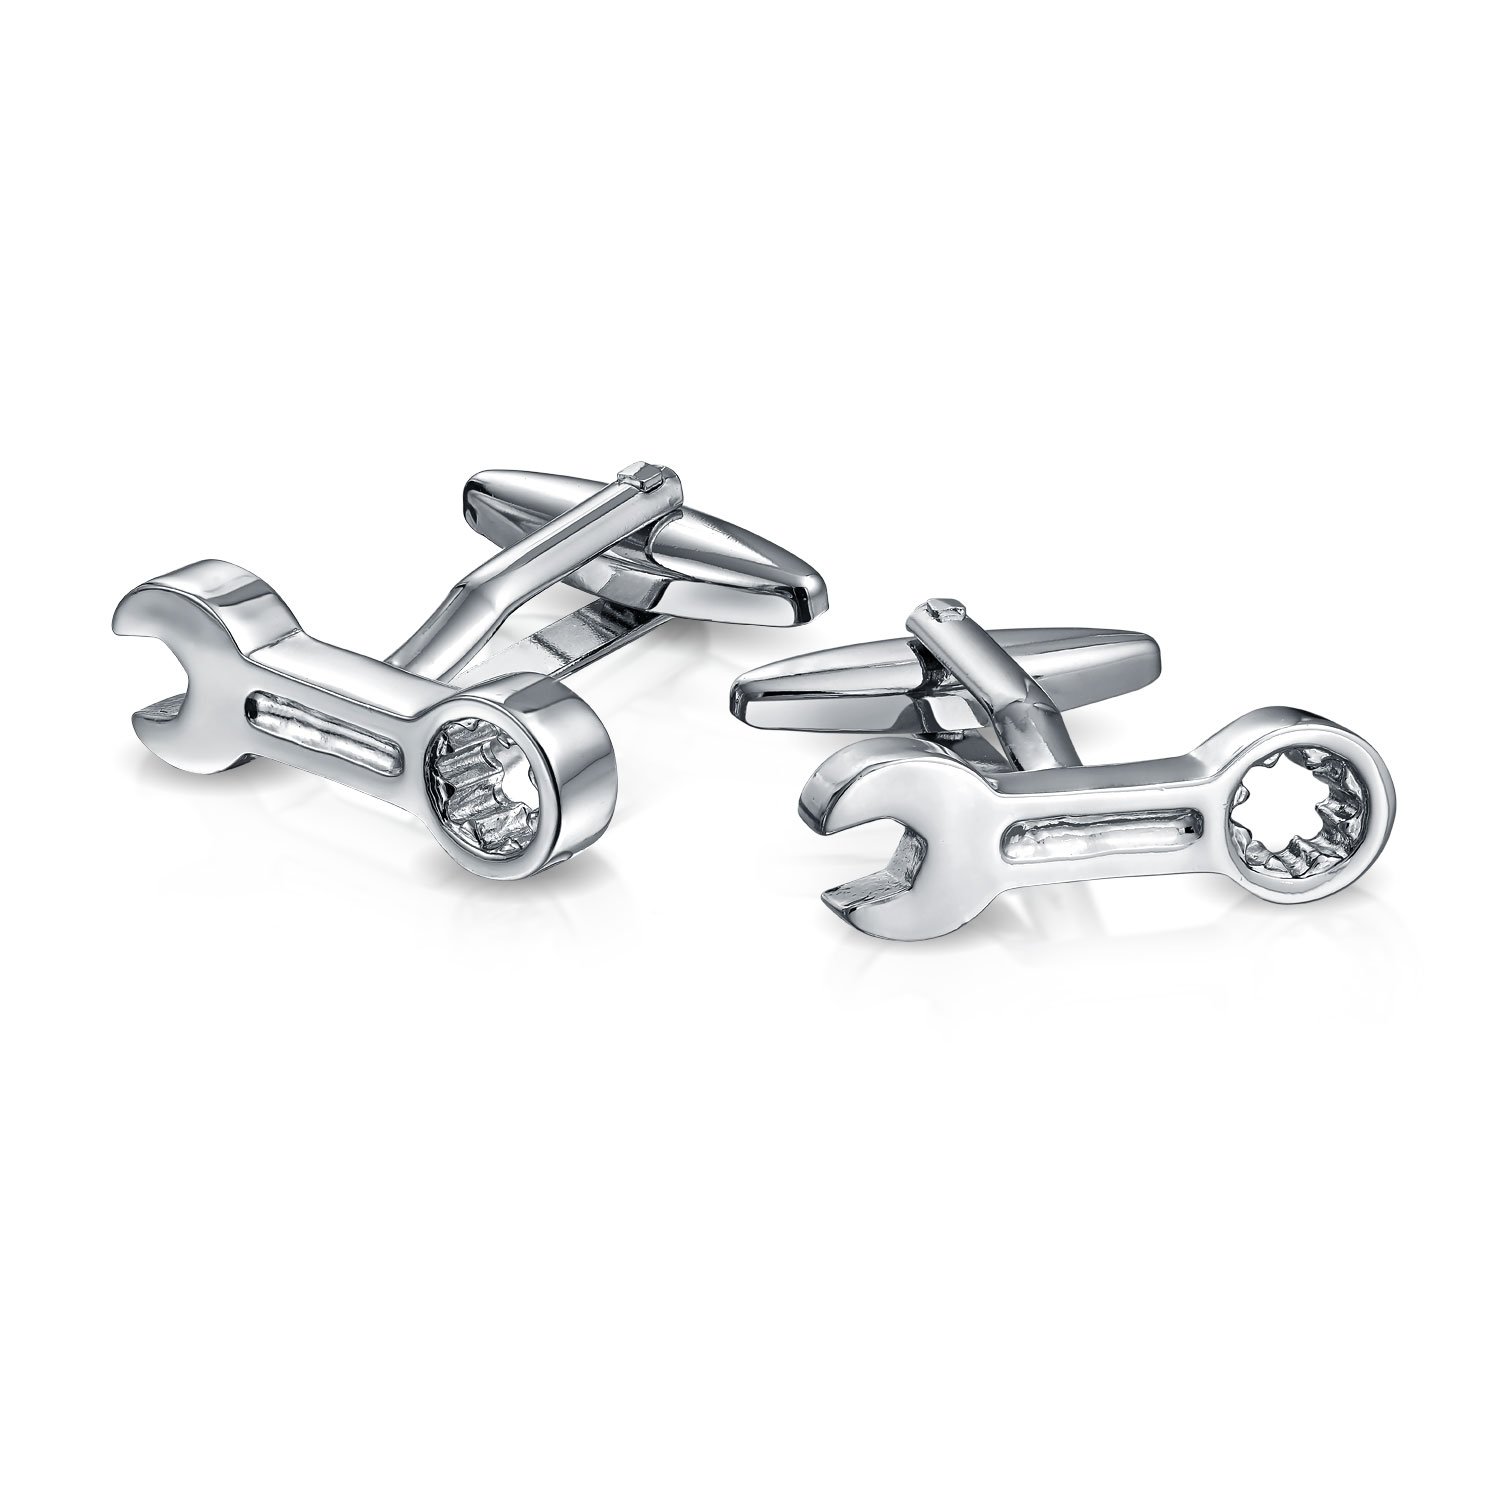 Bling Jewelry Construction Worker Mechanics Tools Socket Wrench Solid Shirt Cufflinks for Men Silver Tone Stainless Steel Hinge Bullet Back